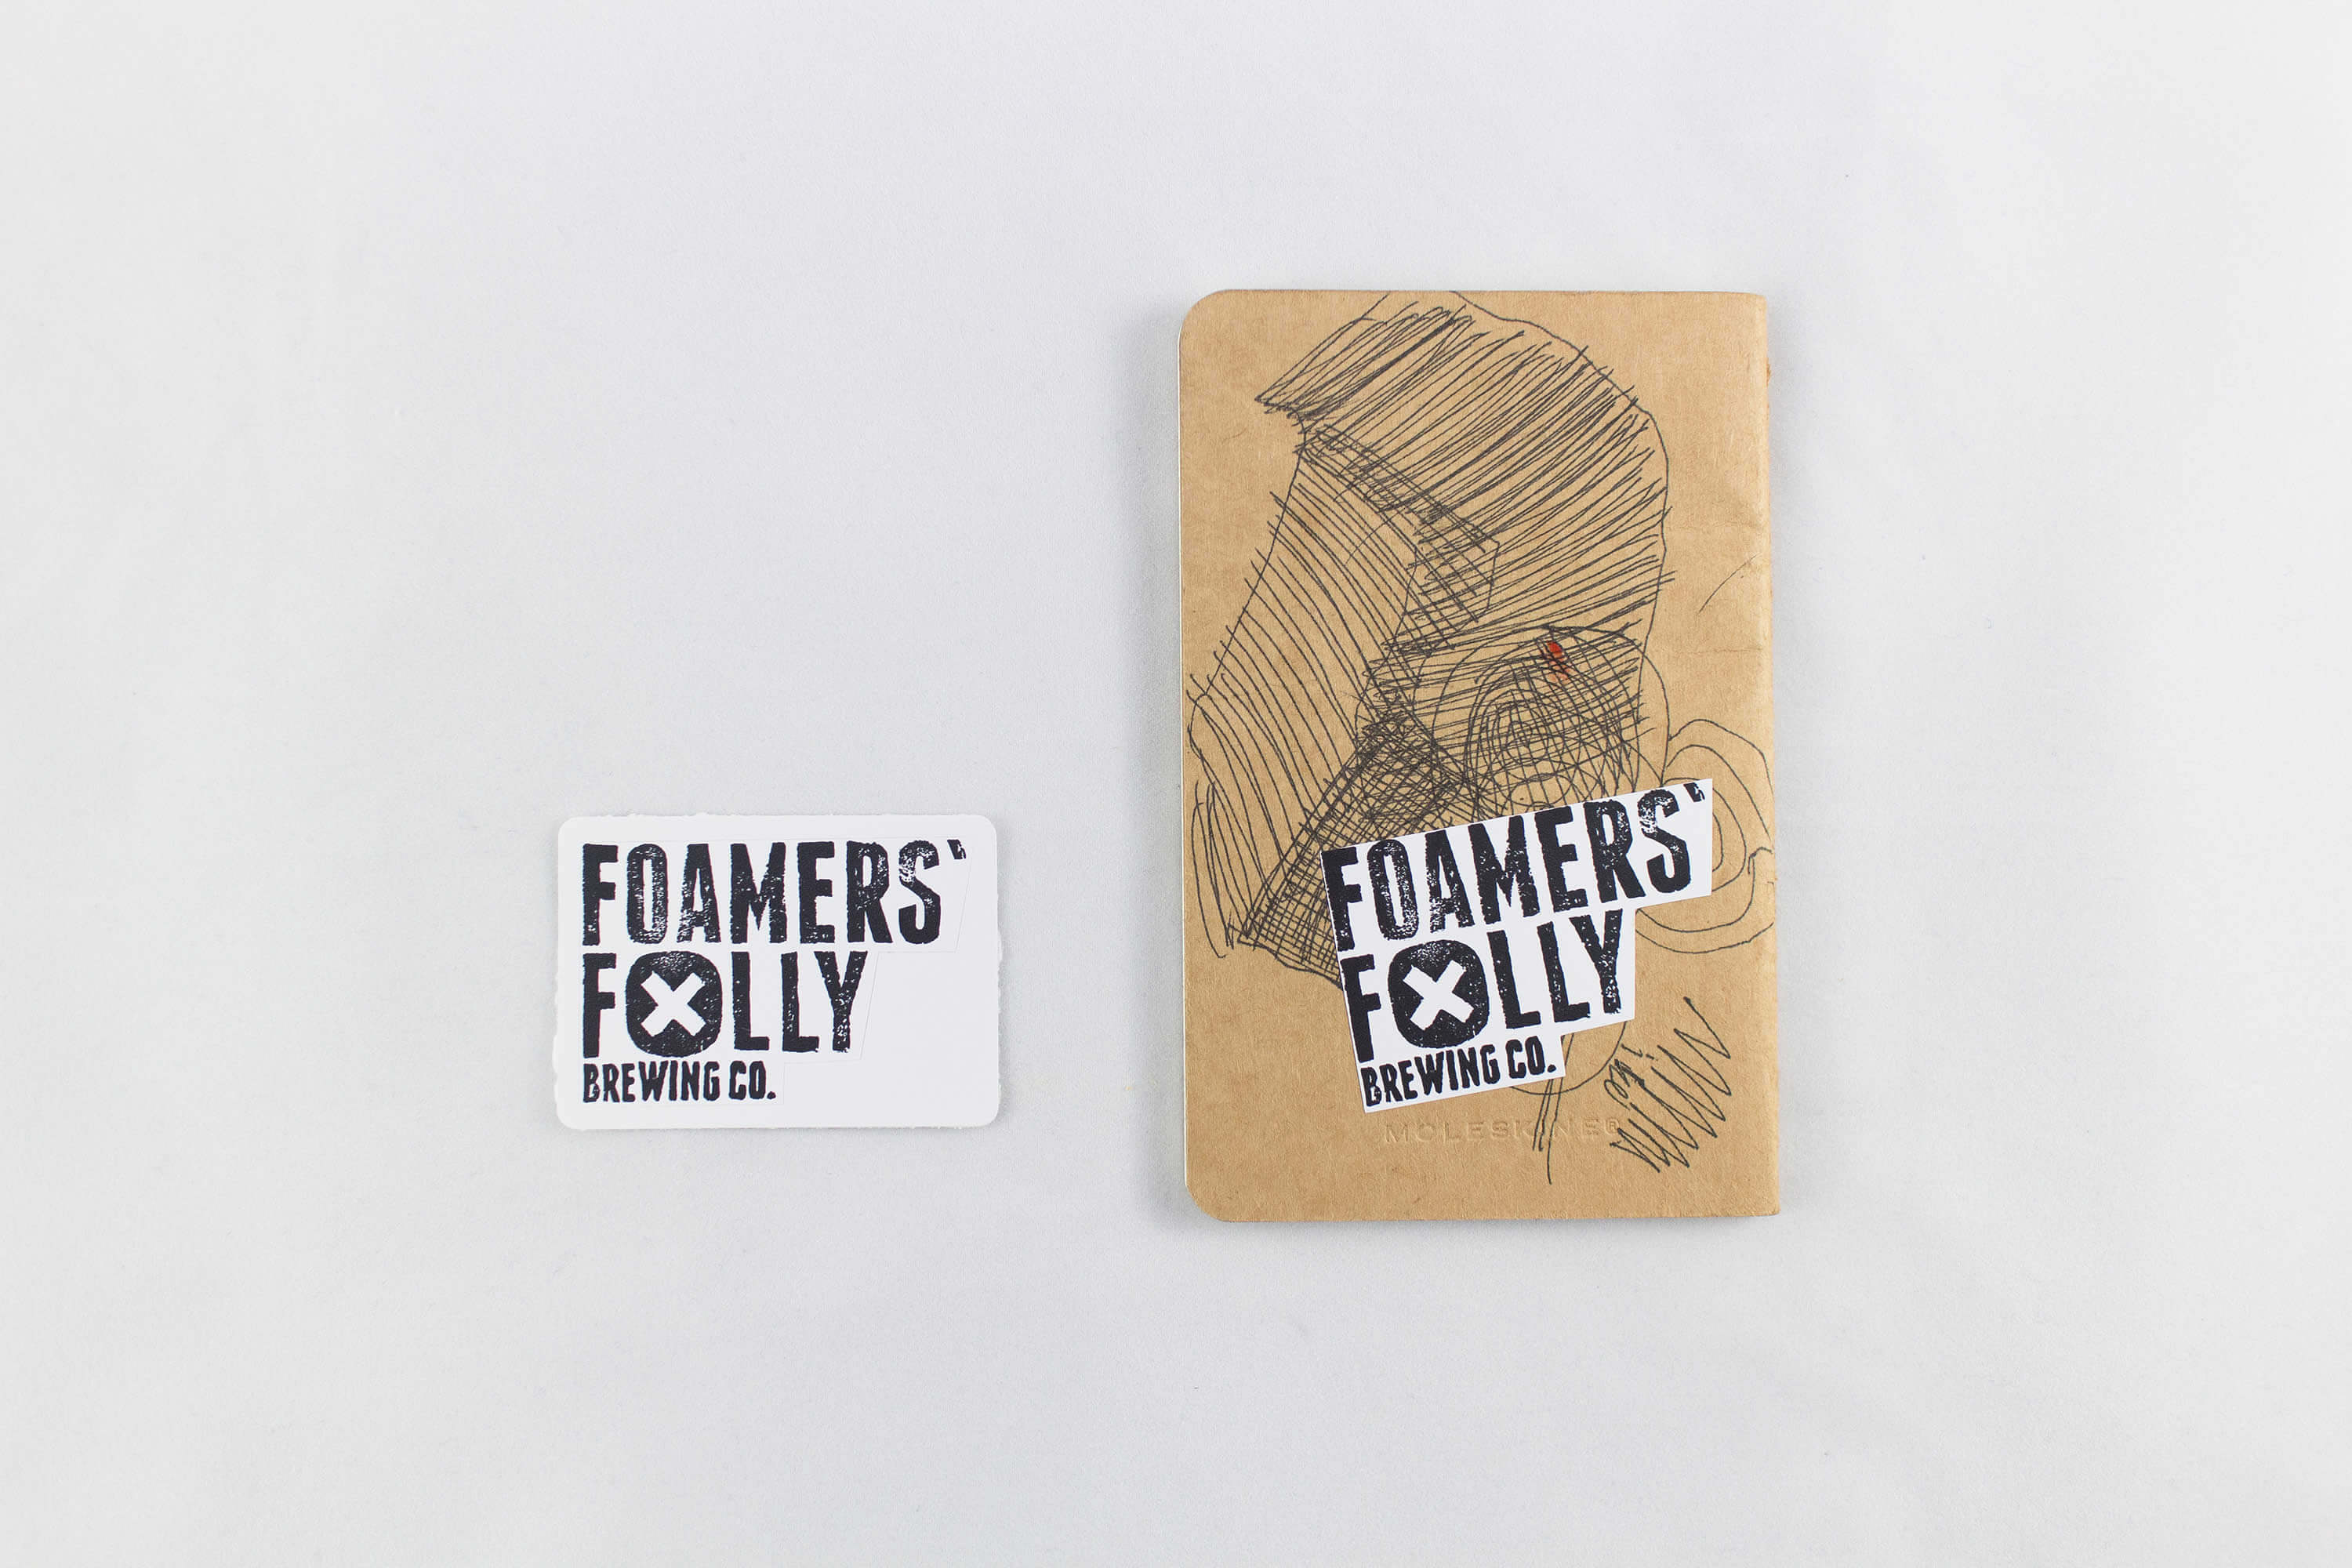 Foamers' Folly Brewing Co. graphic design by Rachel Teresa Park and Michael Strasky